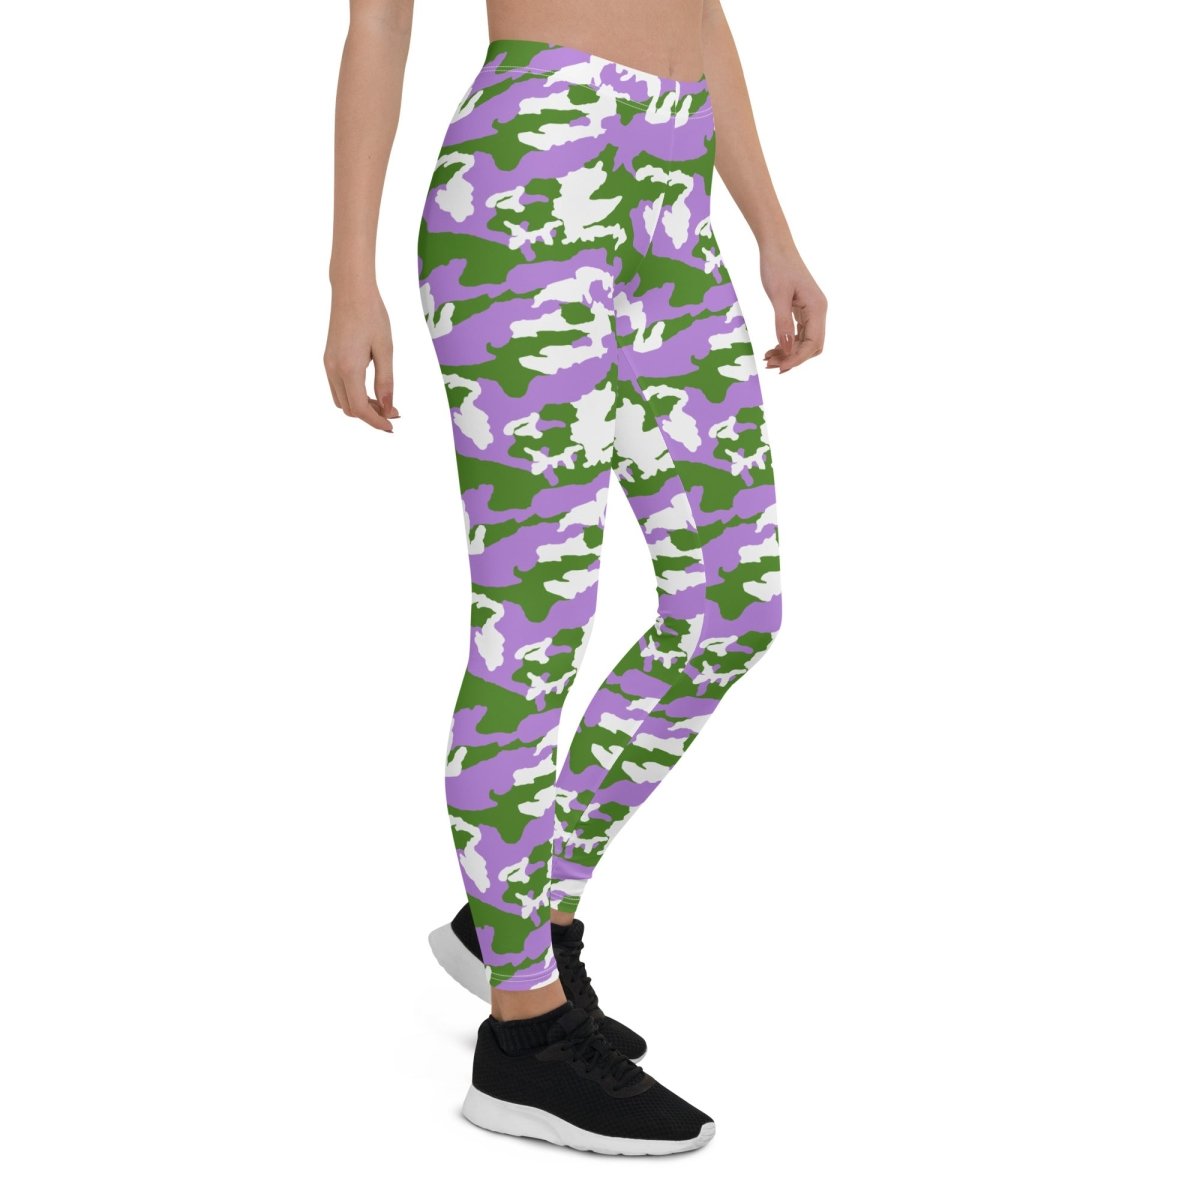 Genderqueer Camouflage Leggings - On Trend Shirts